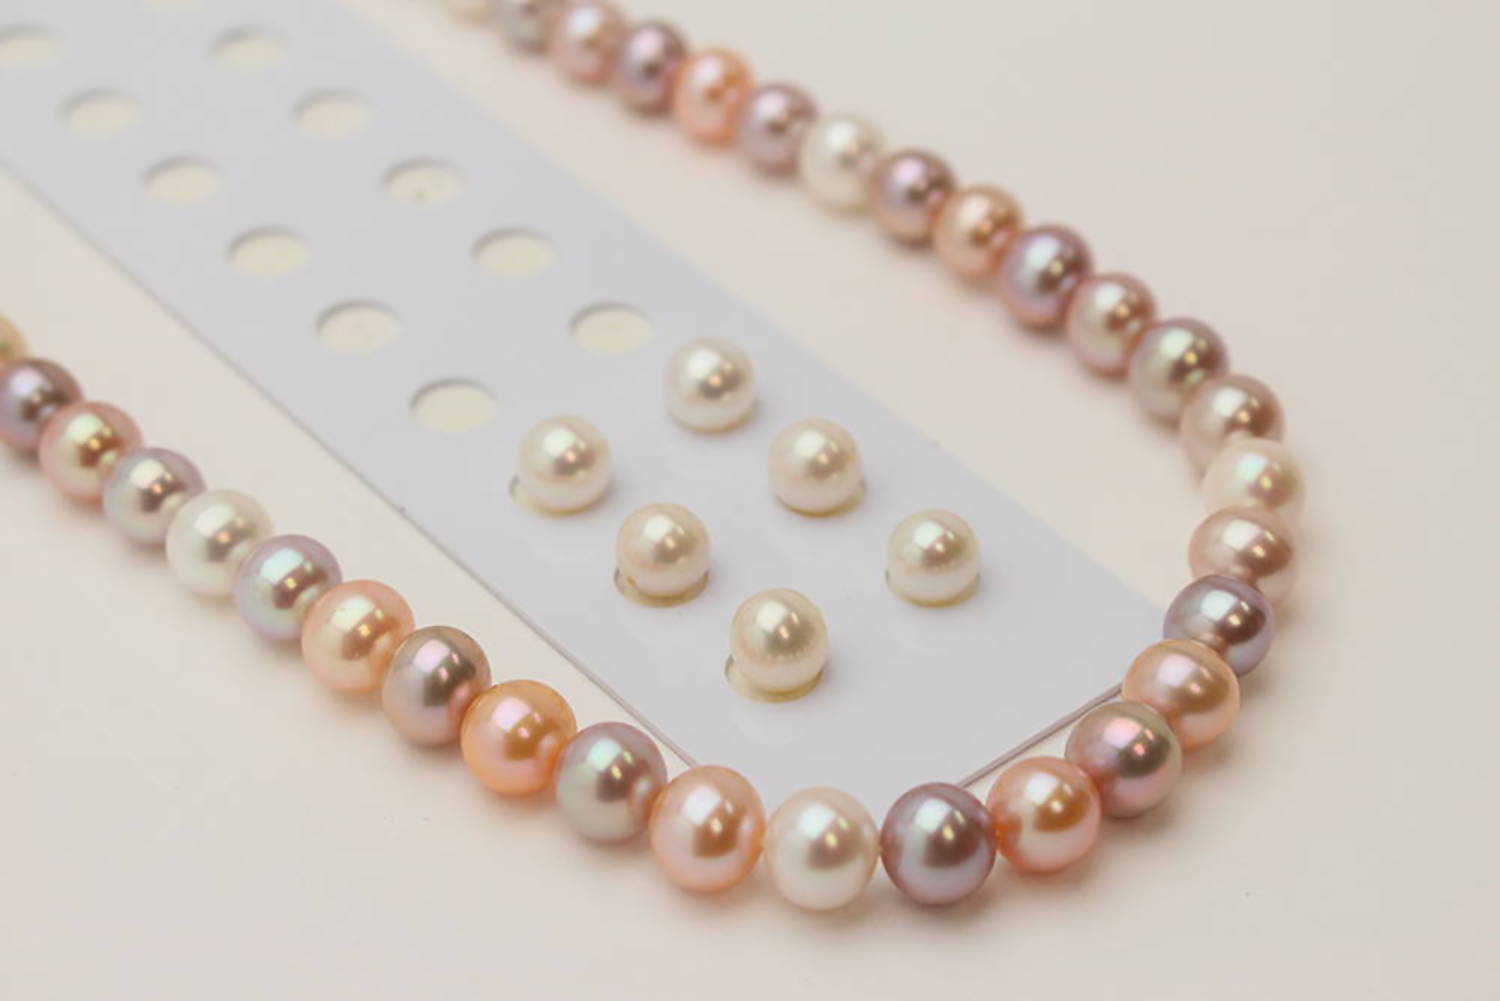 Multi-Colored Freshwater Pearl Necklace with White Earring Pairs